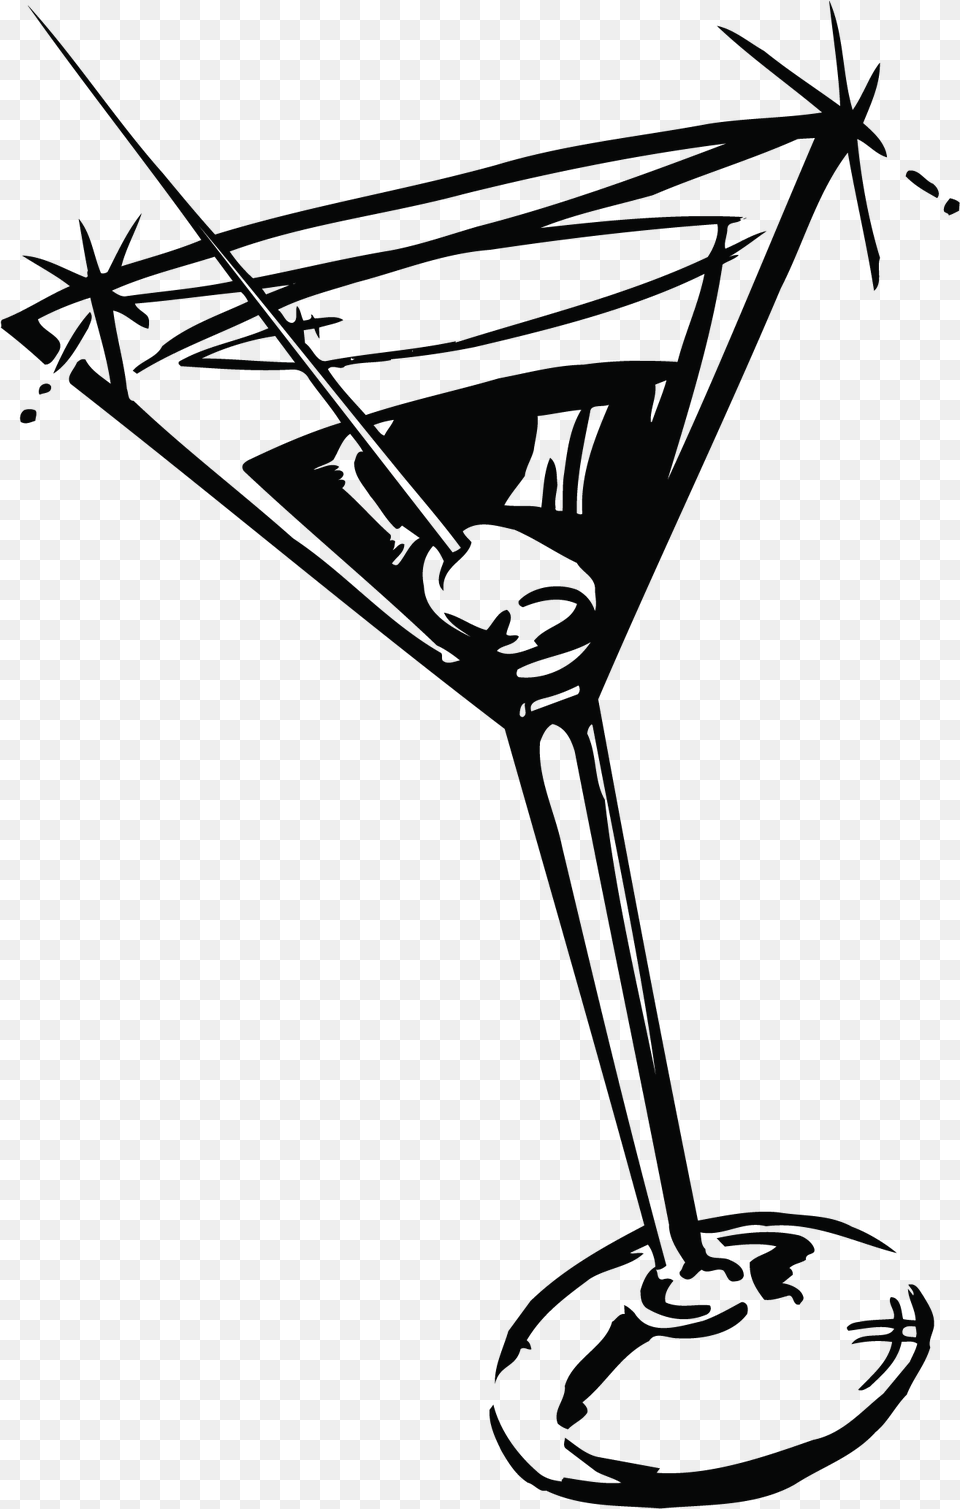 Cocktail Glass Clip Art, Alcohol, Beverage, Martini Png